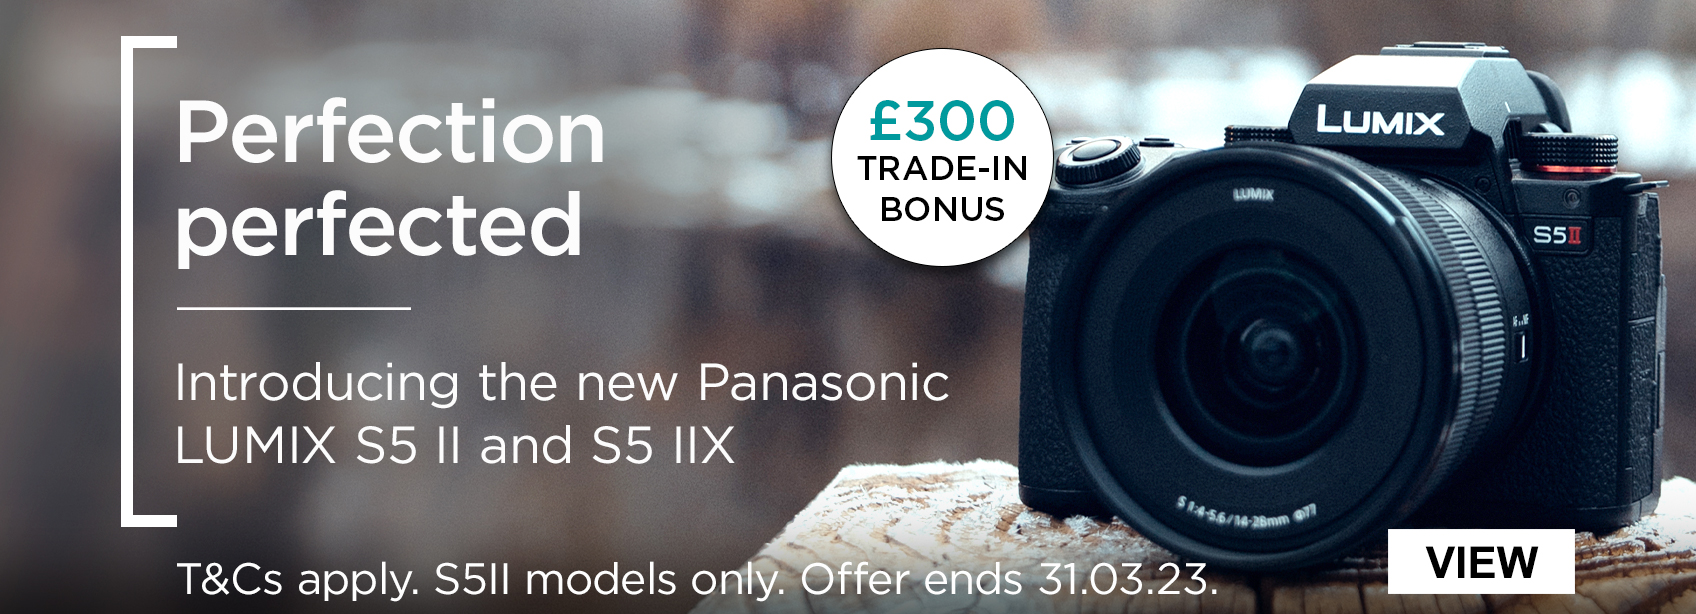 Perfection perfected. Introducing the new Panasonic Lumix S5 II and S5 IIX. £300 Trade-in Bonus. T&Cs apply. Offer ends 31.03.23.